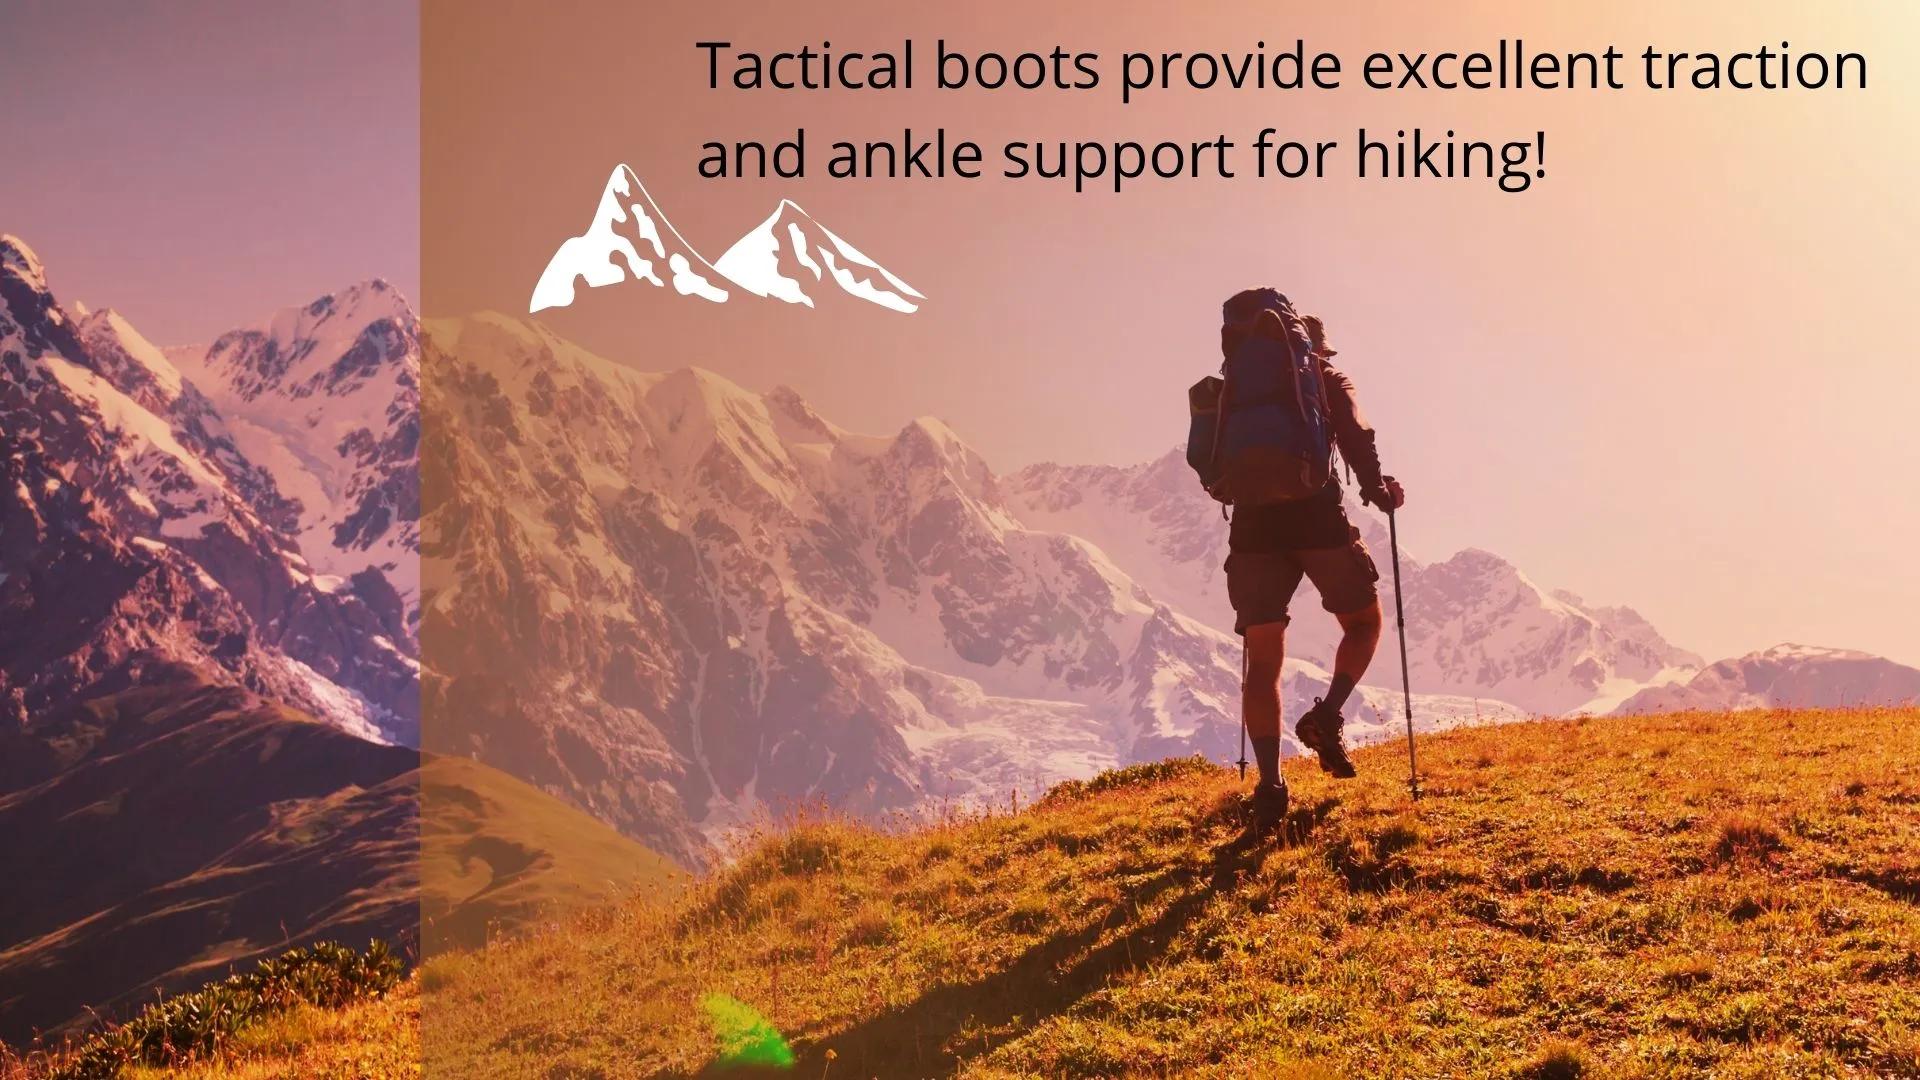  Tactical boots are good for hiking.